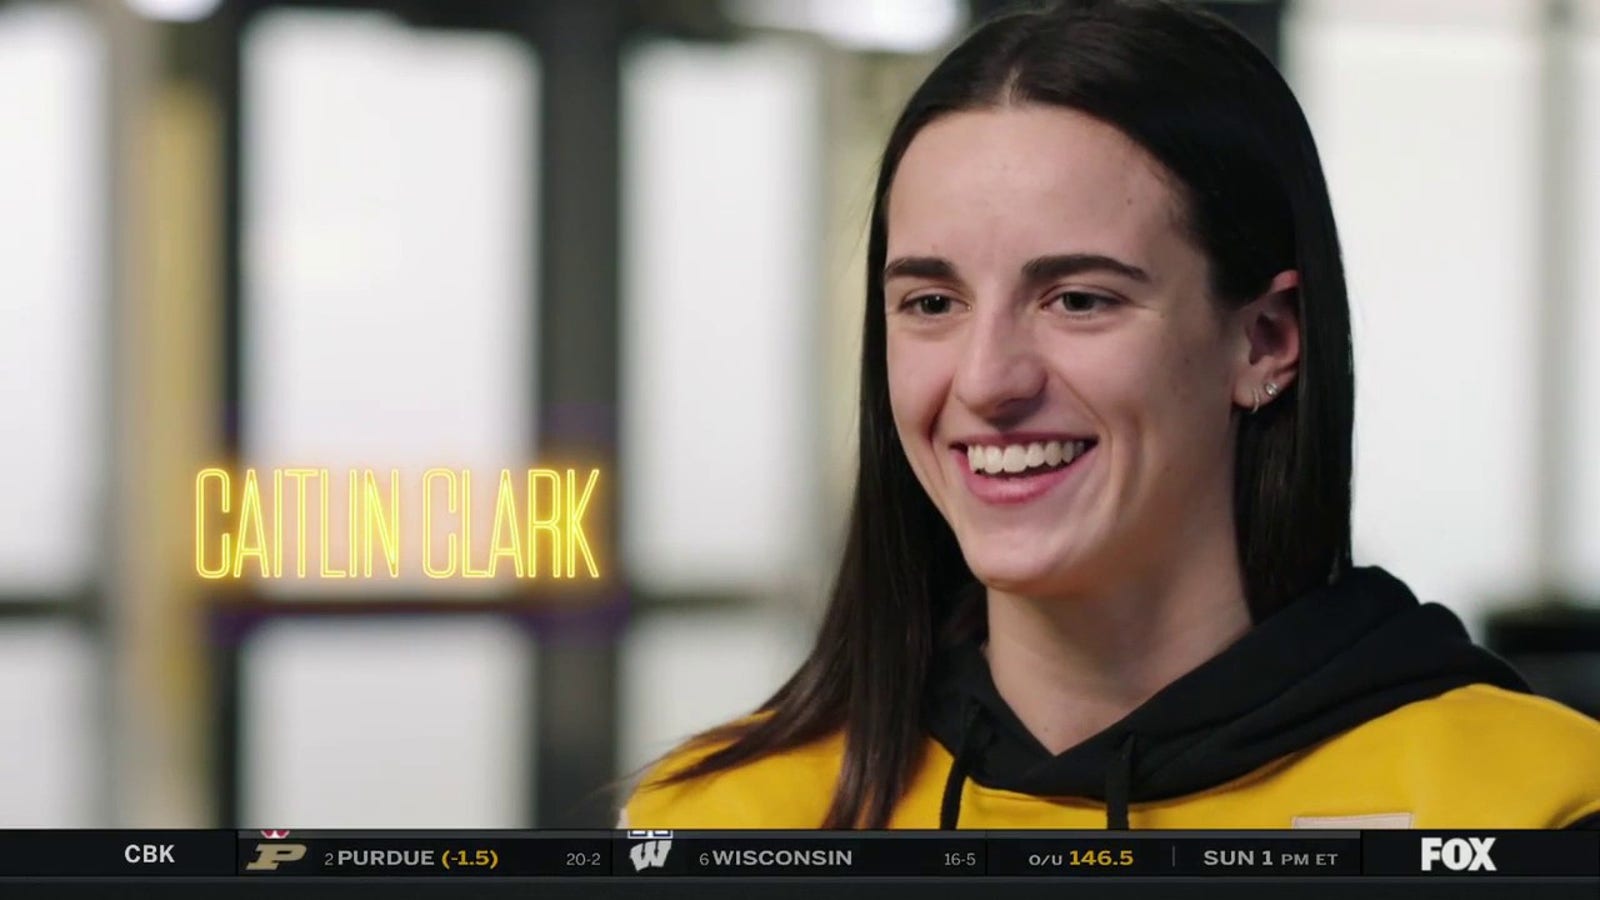 Beryl TV v18co6tdajjomcj7 'Just relief': What Caitlin Clark should expect when she sets scoring record Sports 